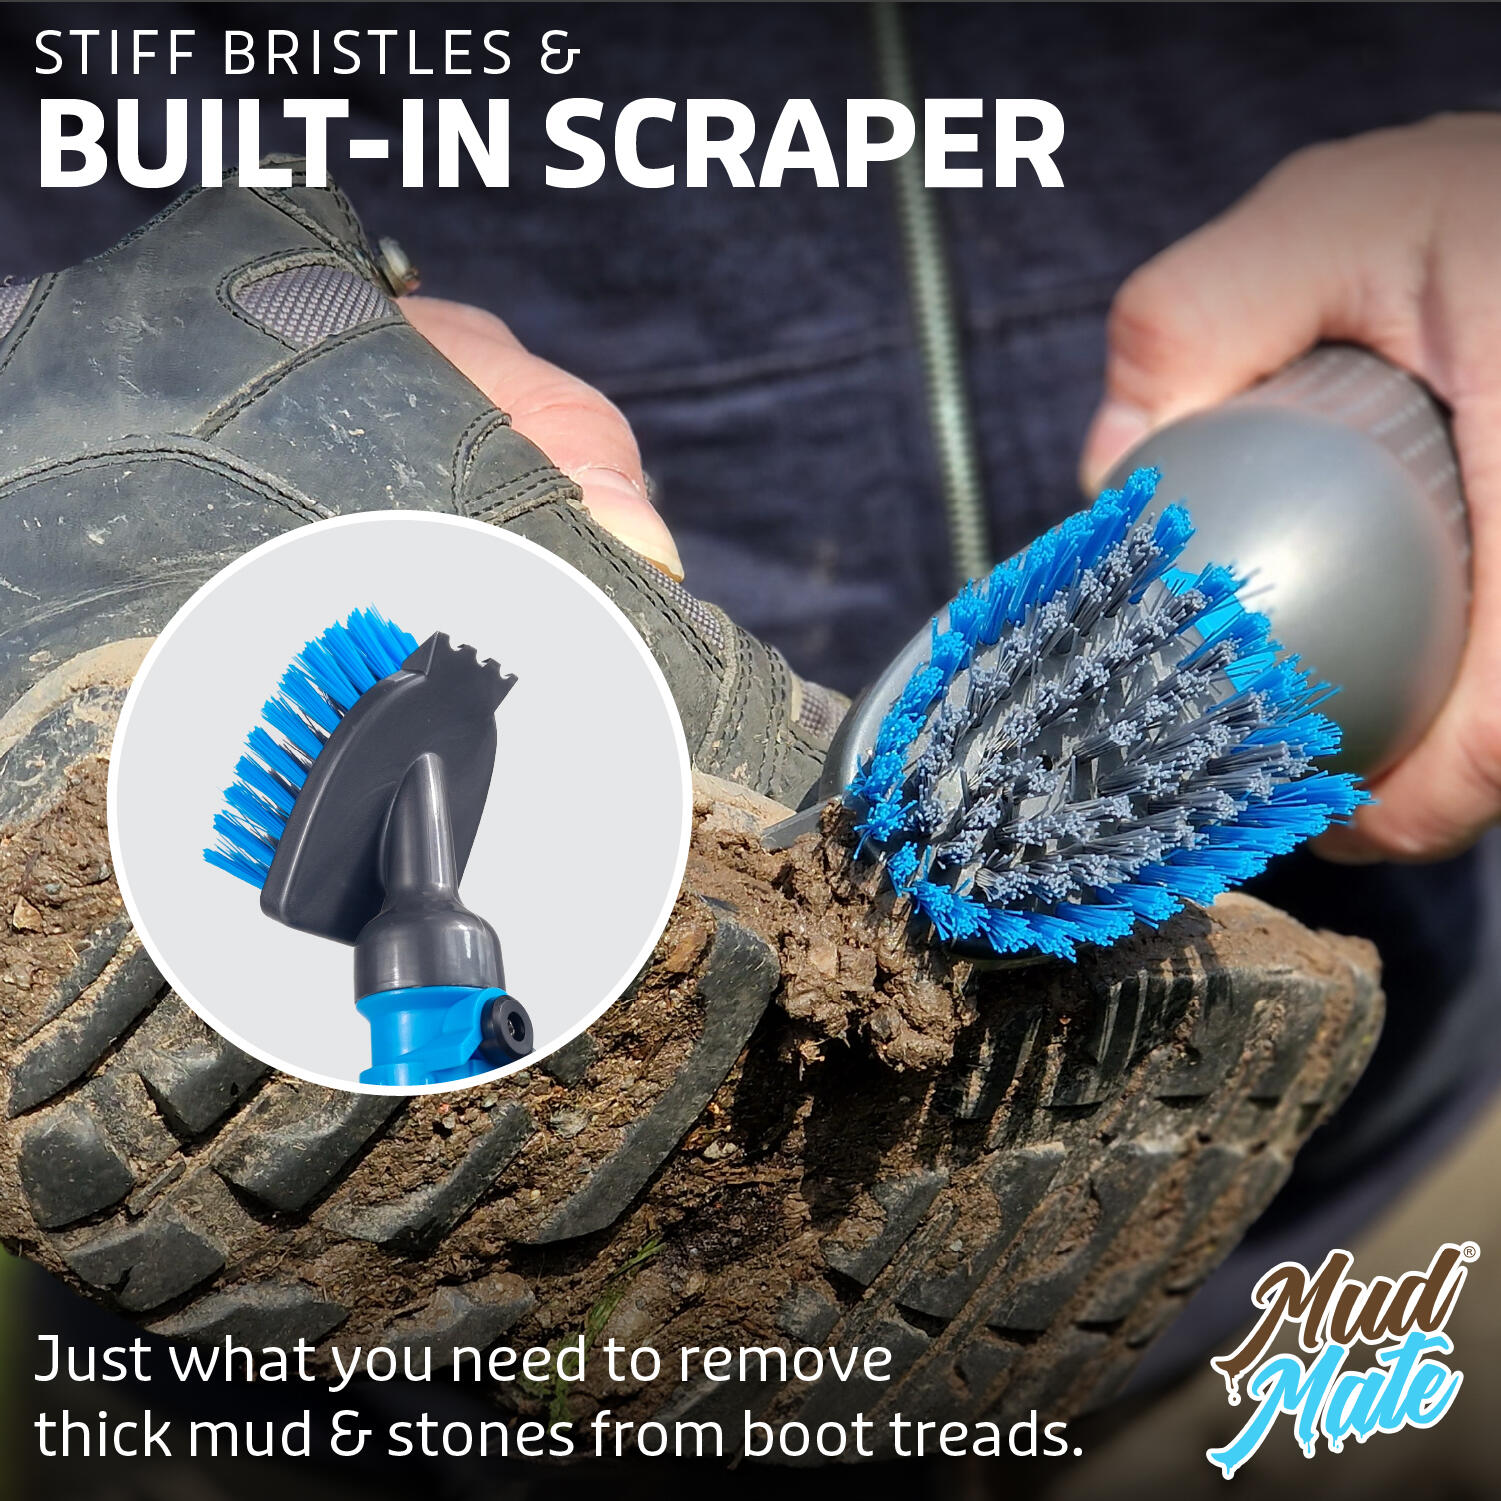 Mud Mate Multi-Use Boot Cleaner Brush & Scraper - for Muddy Boots & Shoes - with 7/7